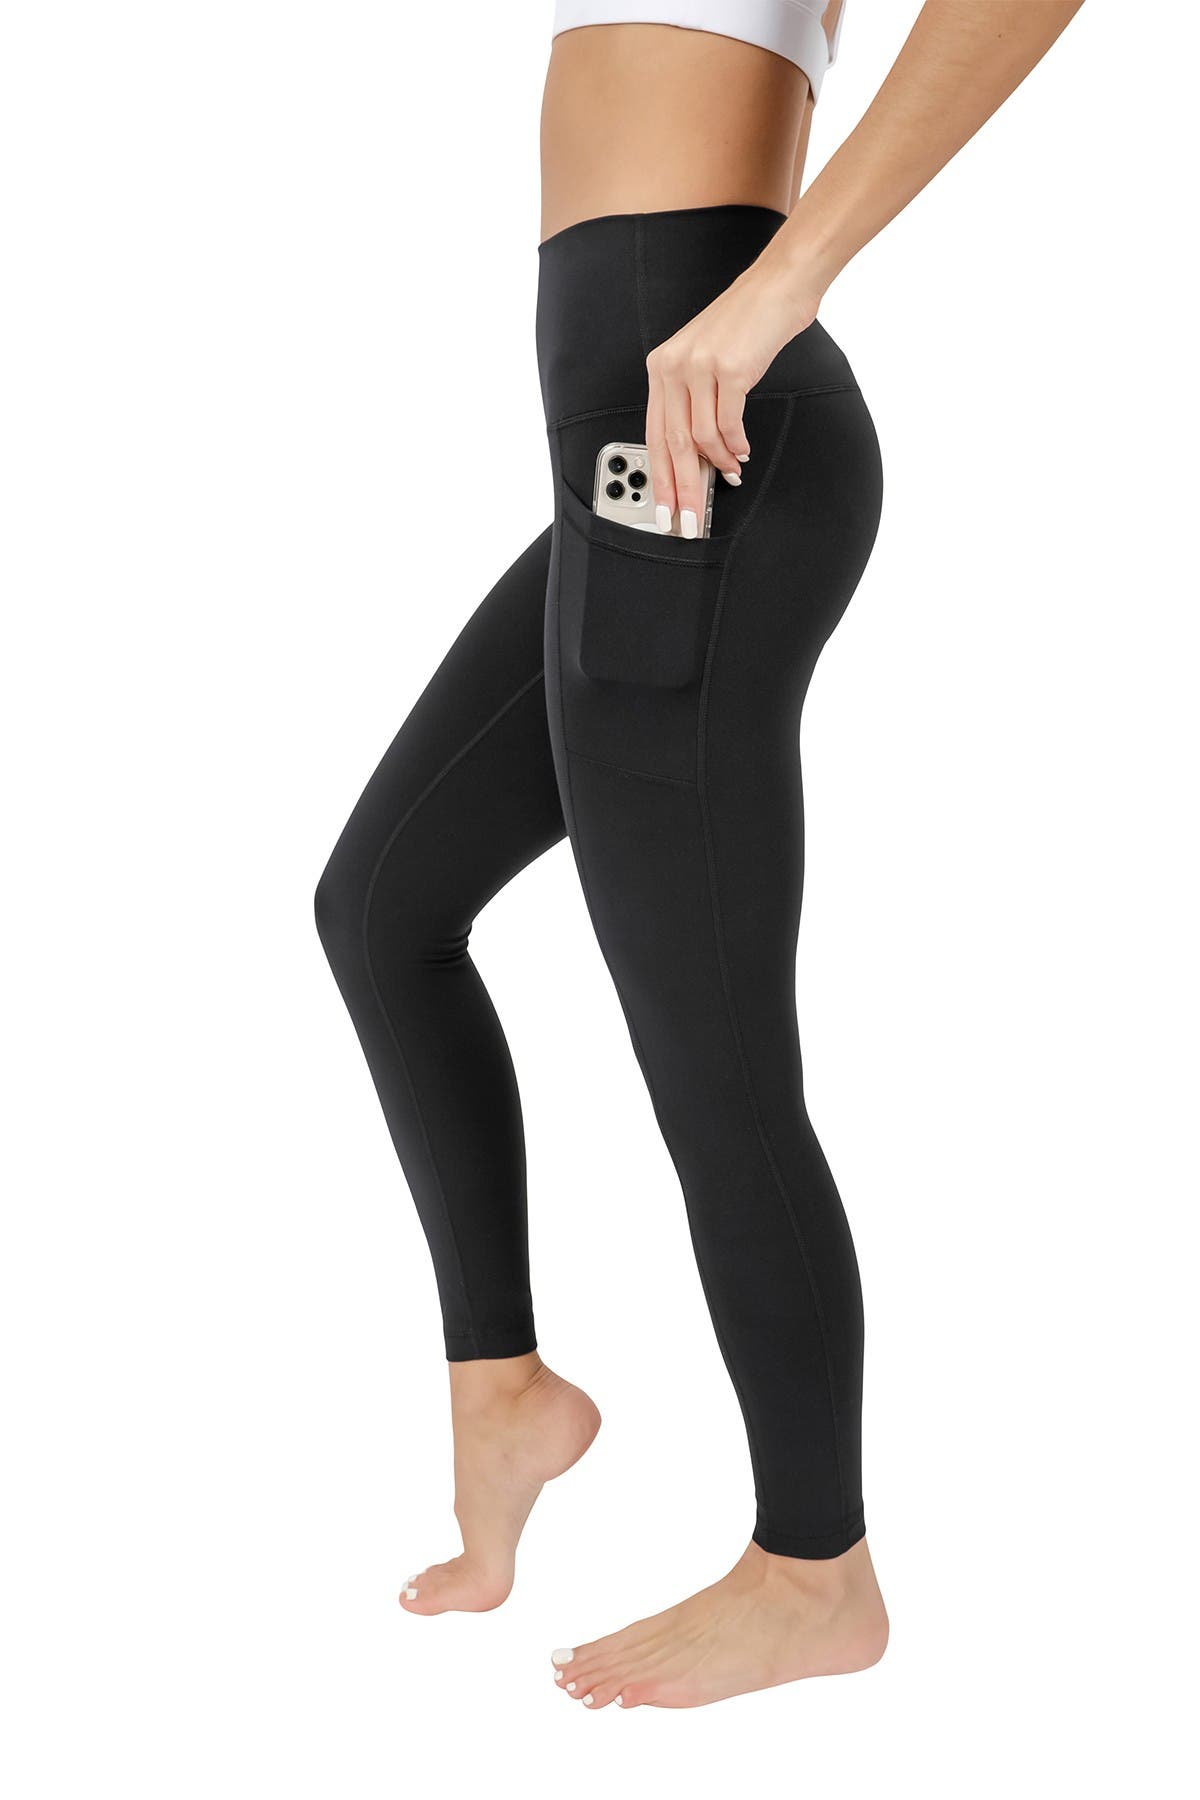 90 Degree by Reflex Cotton Super High Waist Ankle Length Compression Leggings with Elastic Free Waistband 